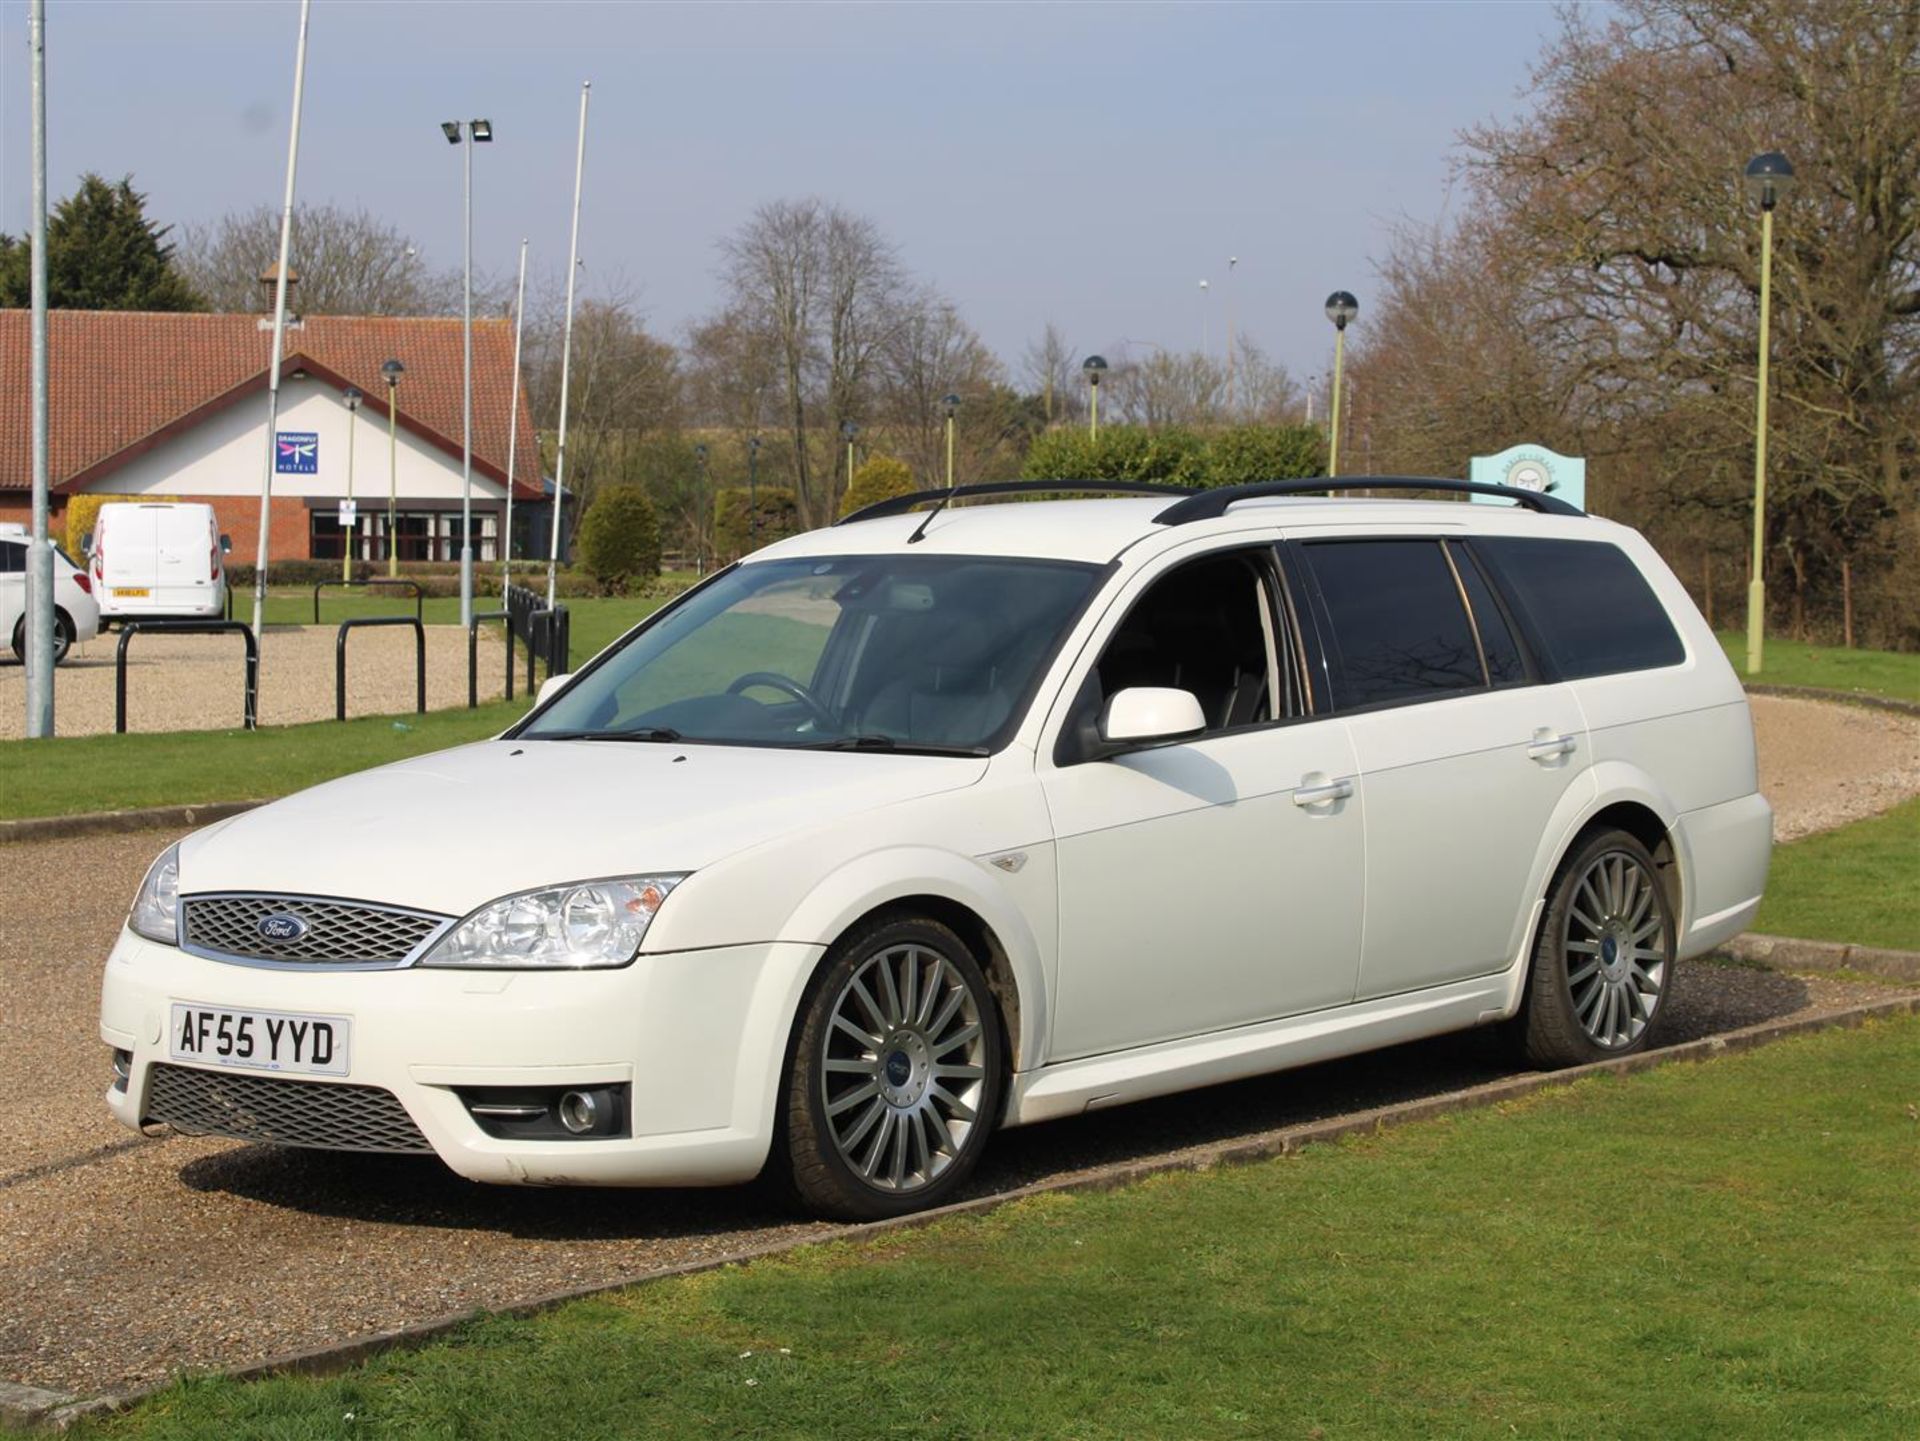 2005 Ford Mondeo ST220 Estate - Image 3 of 19